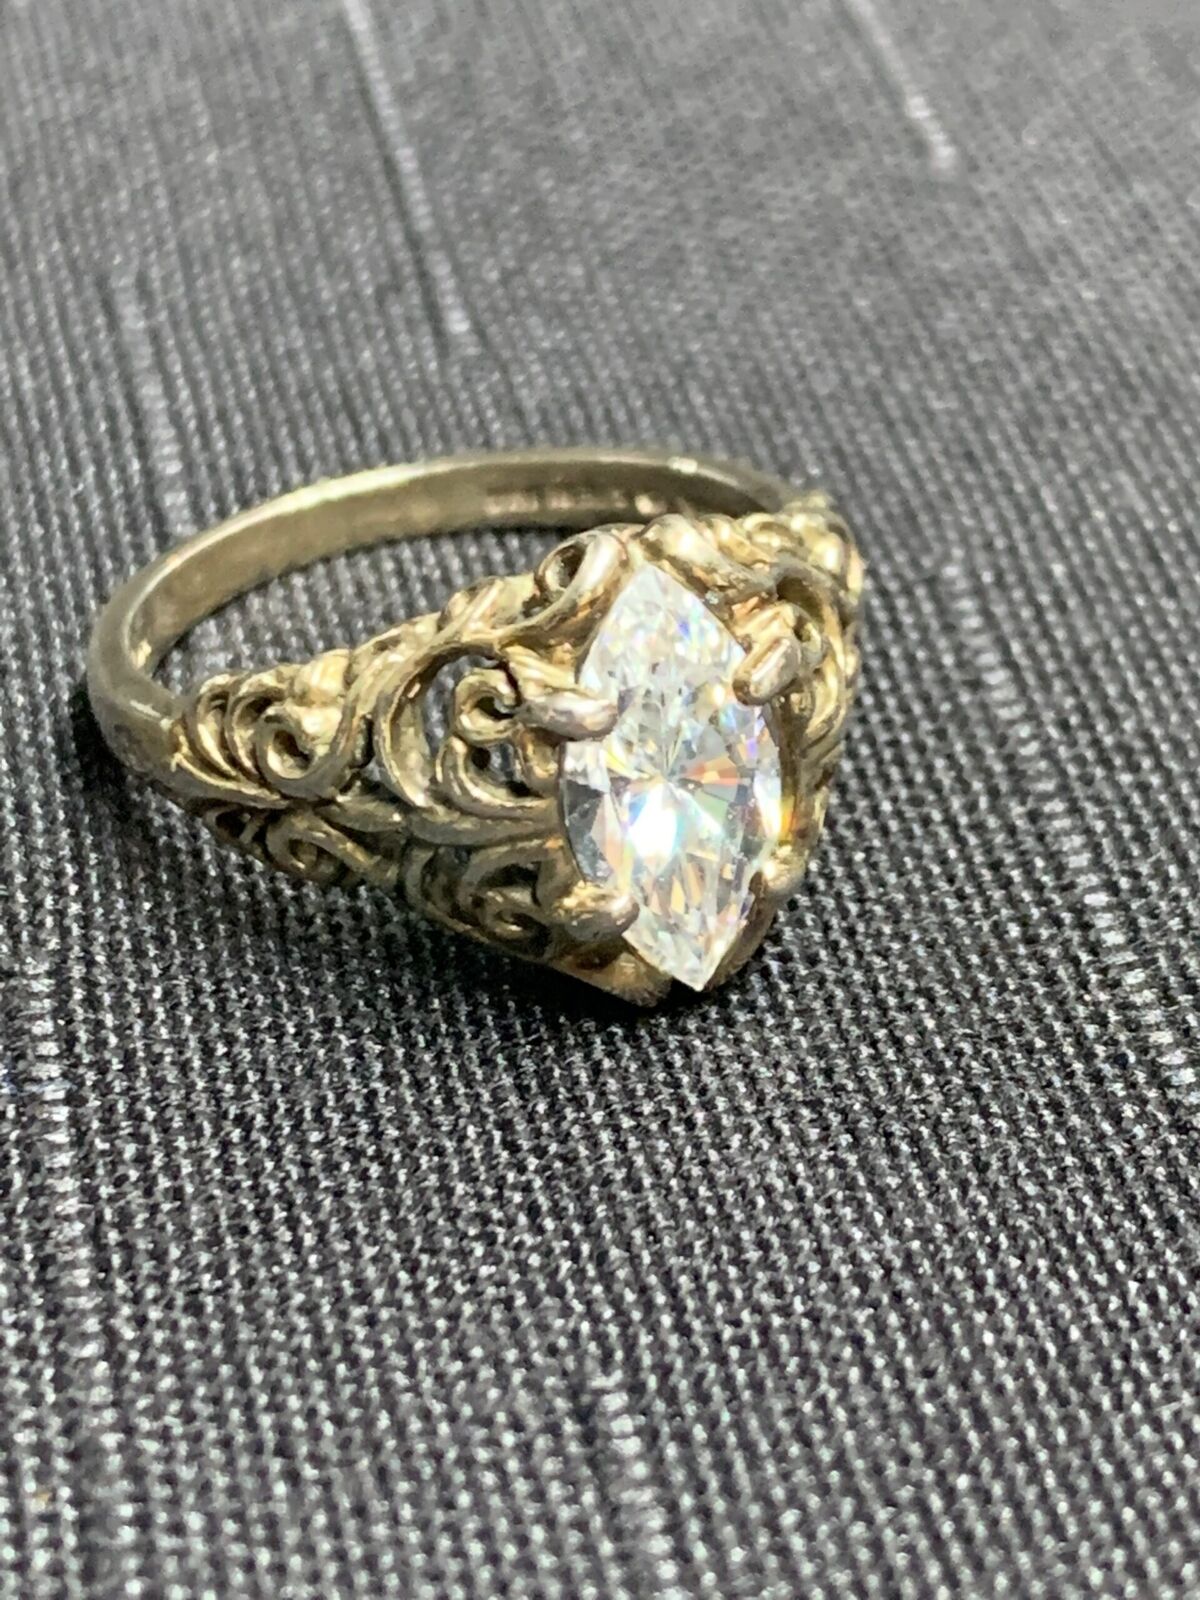 SILVER RING - WITH LARGE UNIDENTIFIED WHITE STONE SETTING